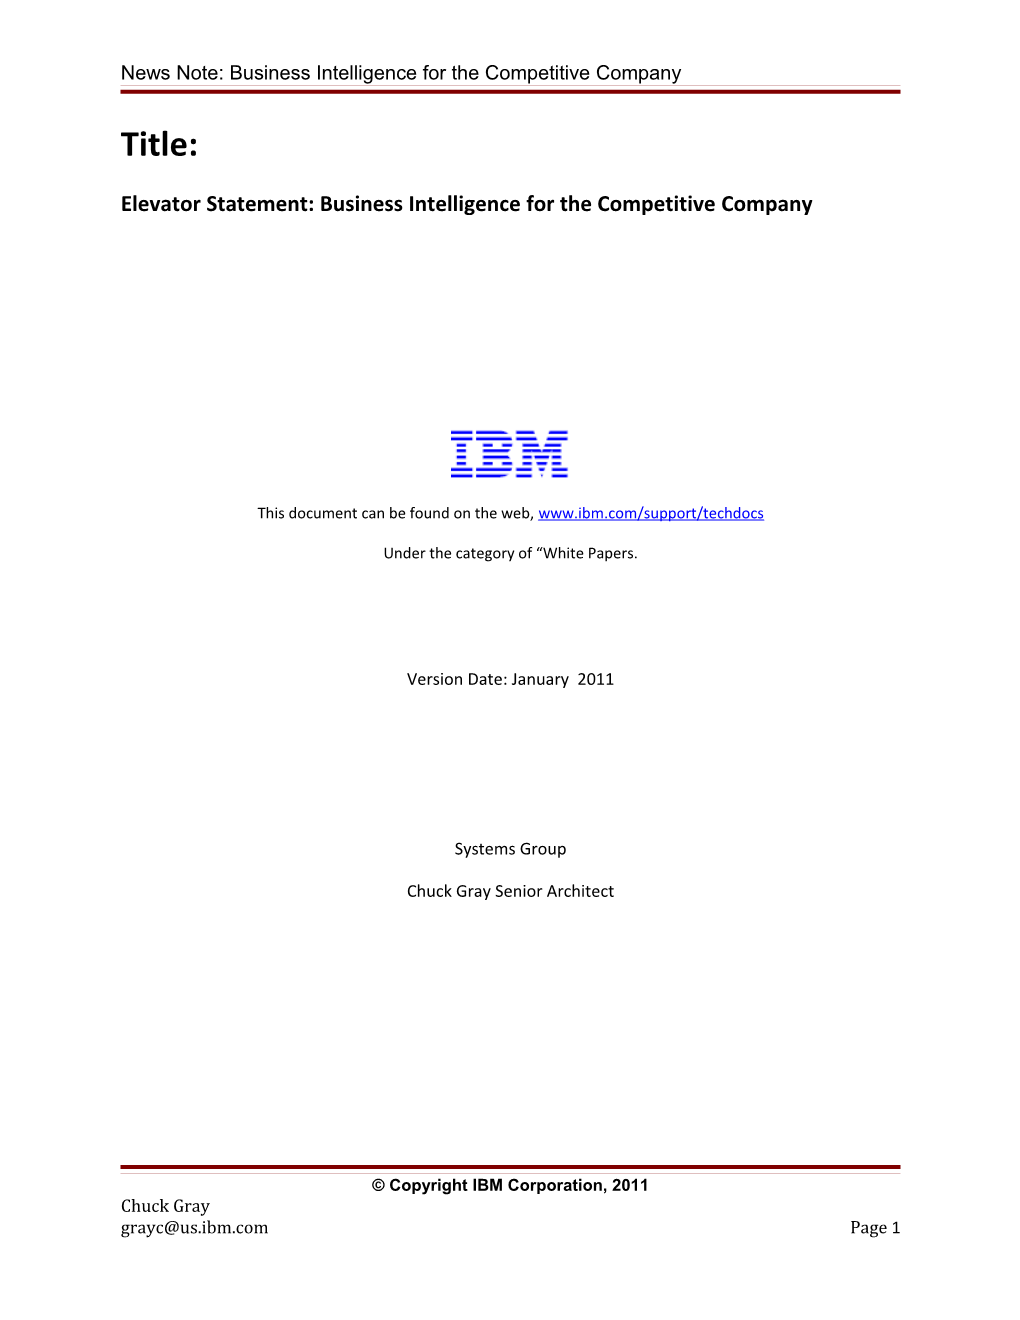 News Note: Business Intelligence for the Competitive Company